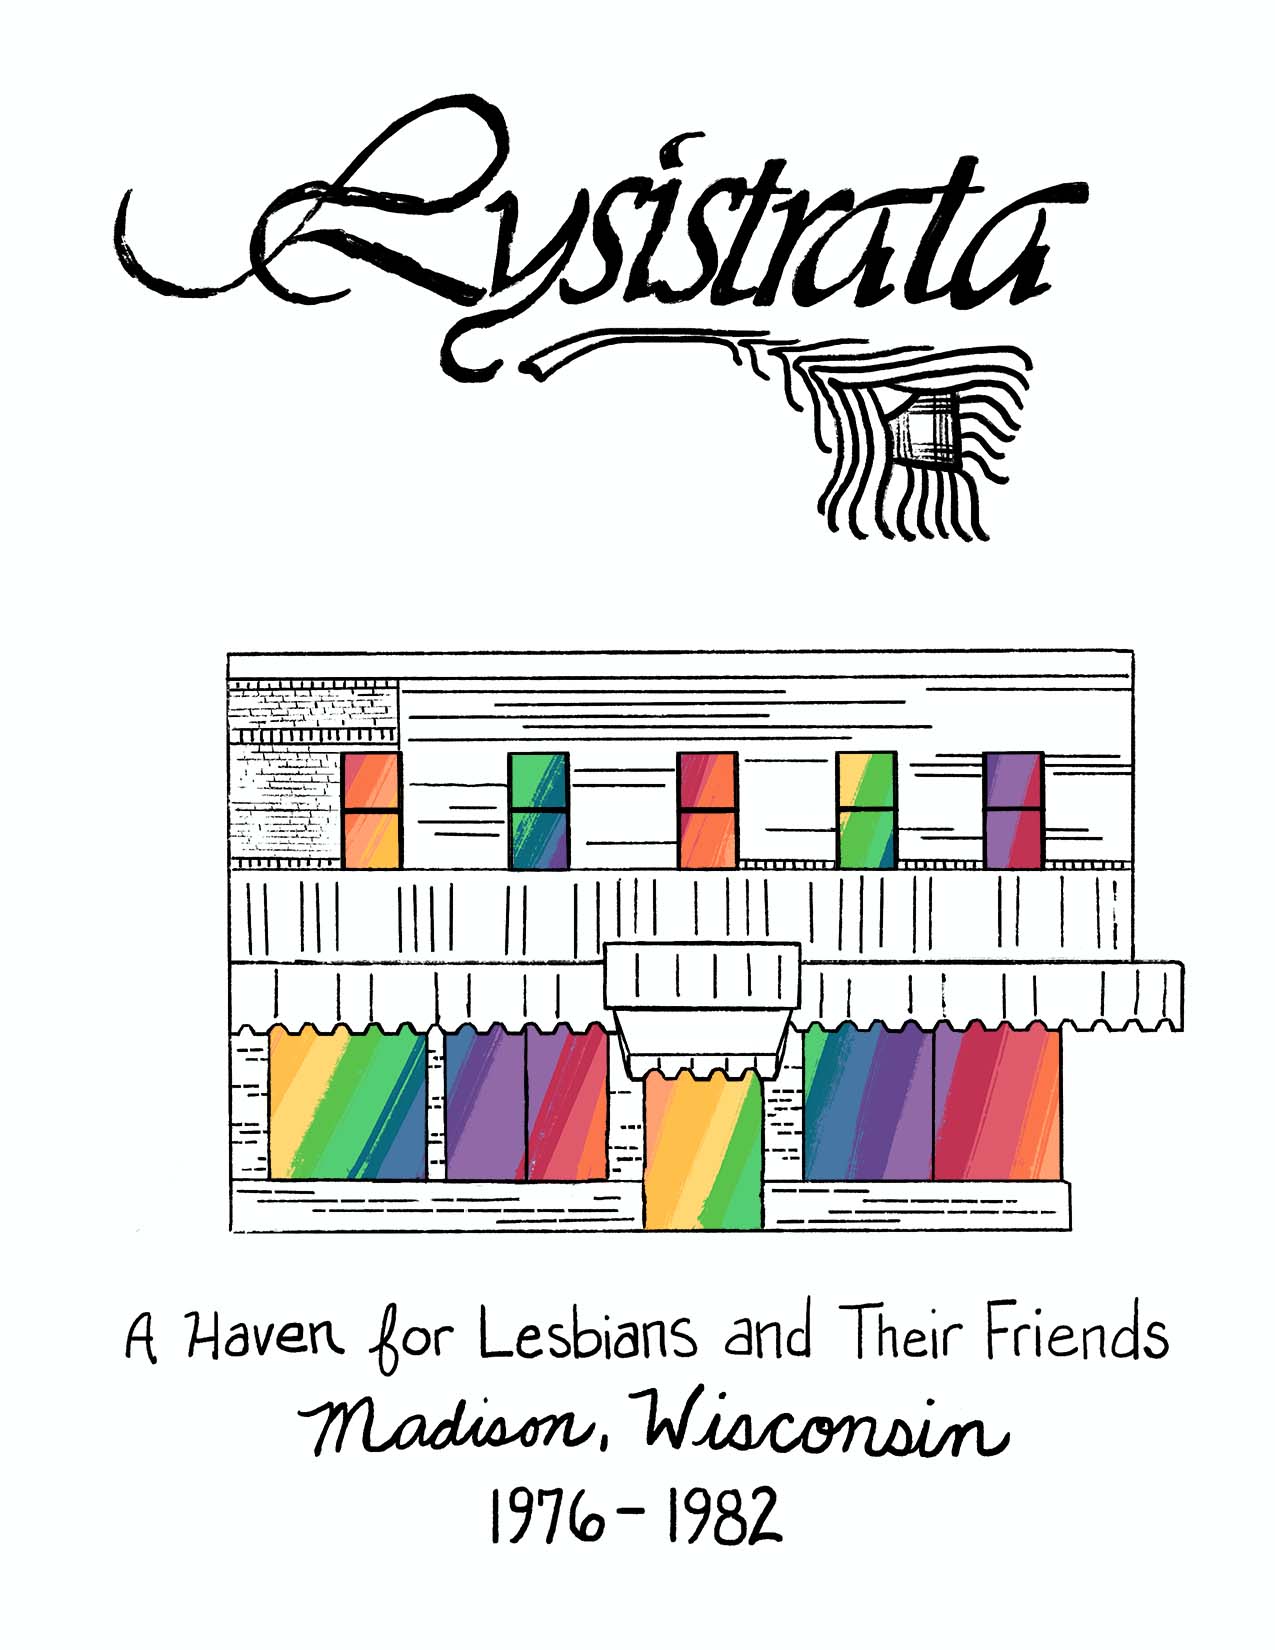 Lysistrata: A Haven for Lesbians and Their Friends. Madison, Wisconsin, 1976 - 1982